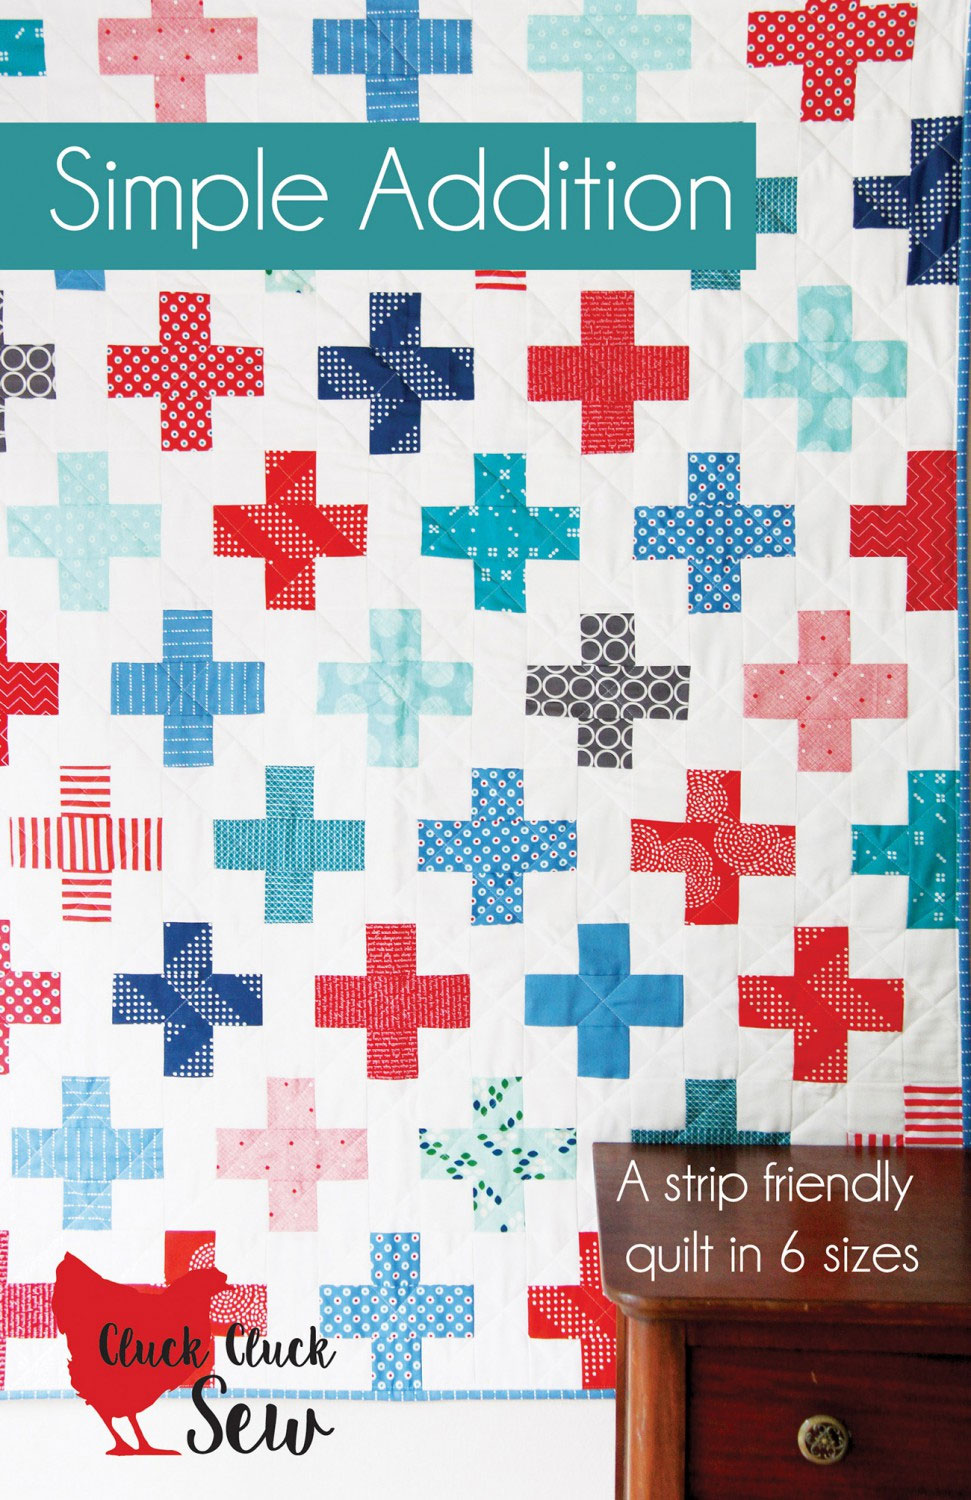 Simple-Addition-quilt-sewing-pattern-Cluck-Cluck-Sew-front